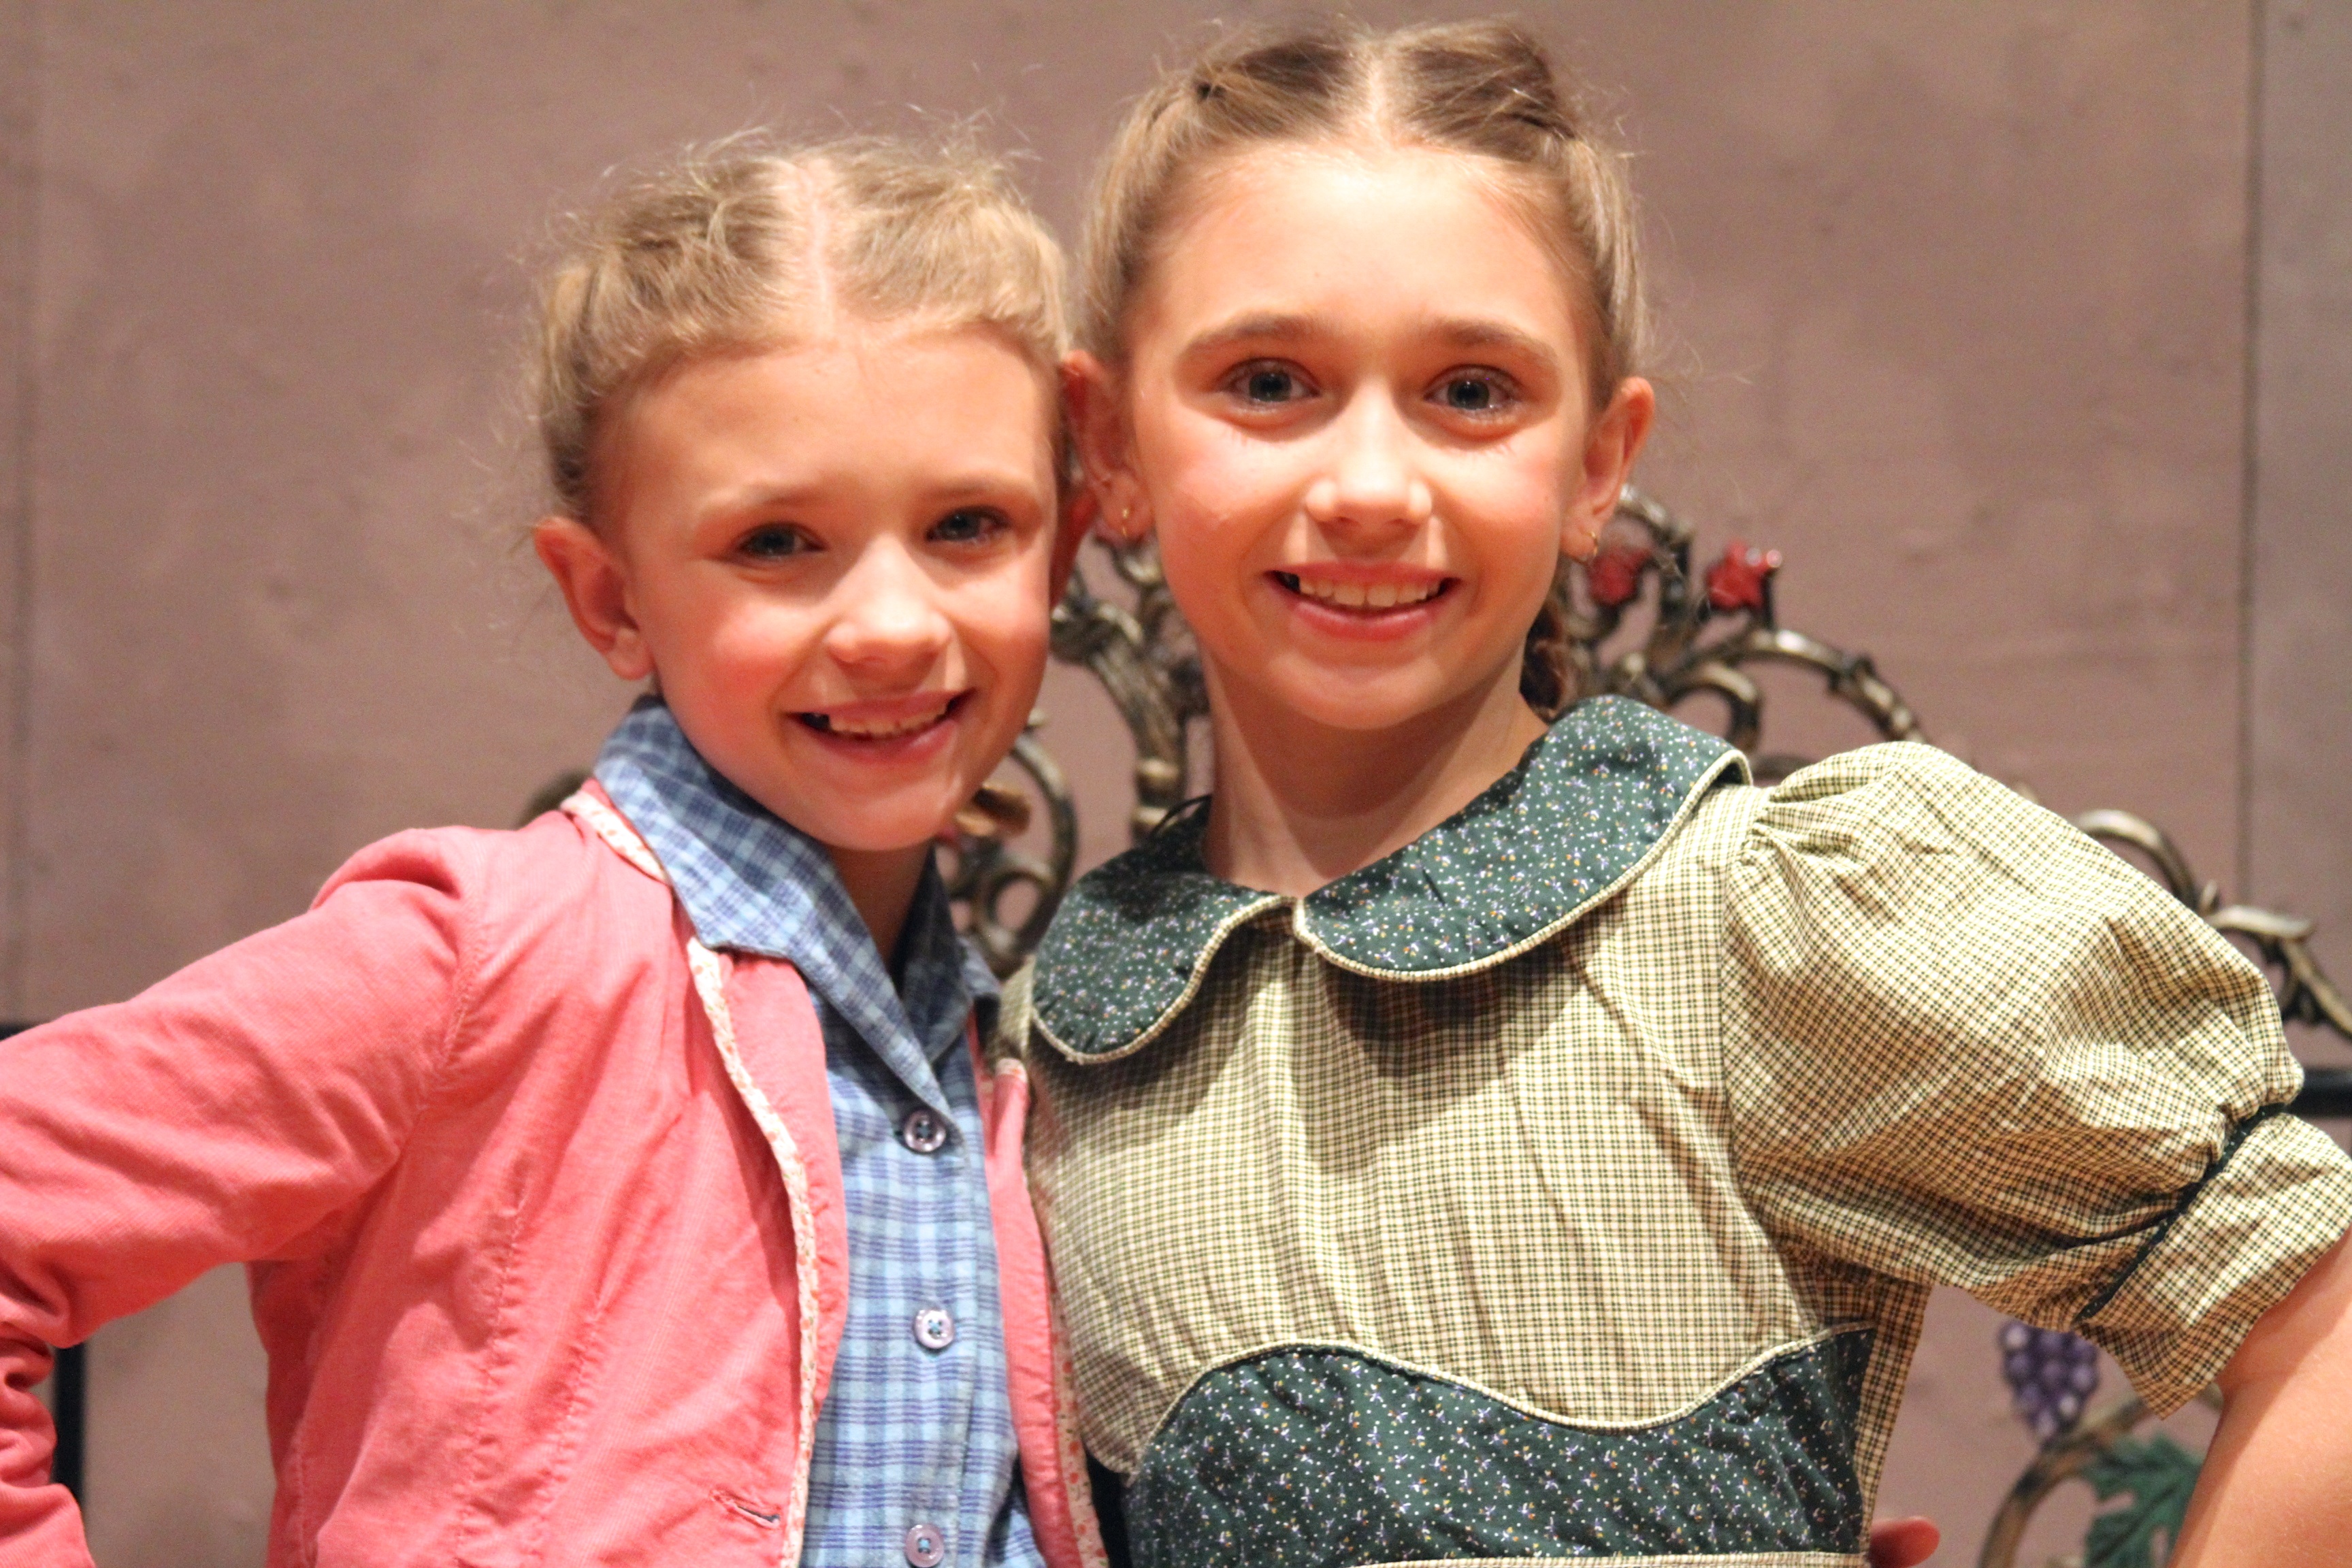 Lauren appearing as Brigitta in the Sound of Music with her sister Alexis as Marta